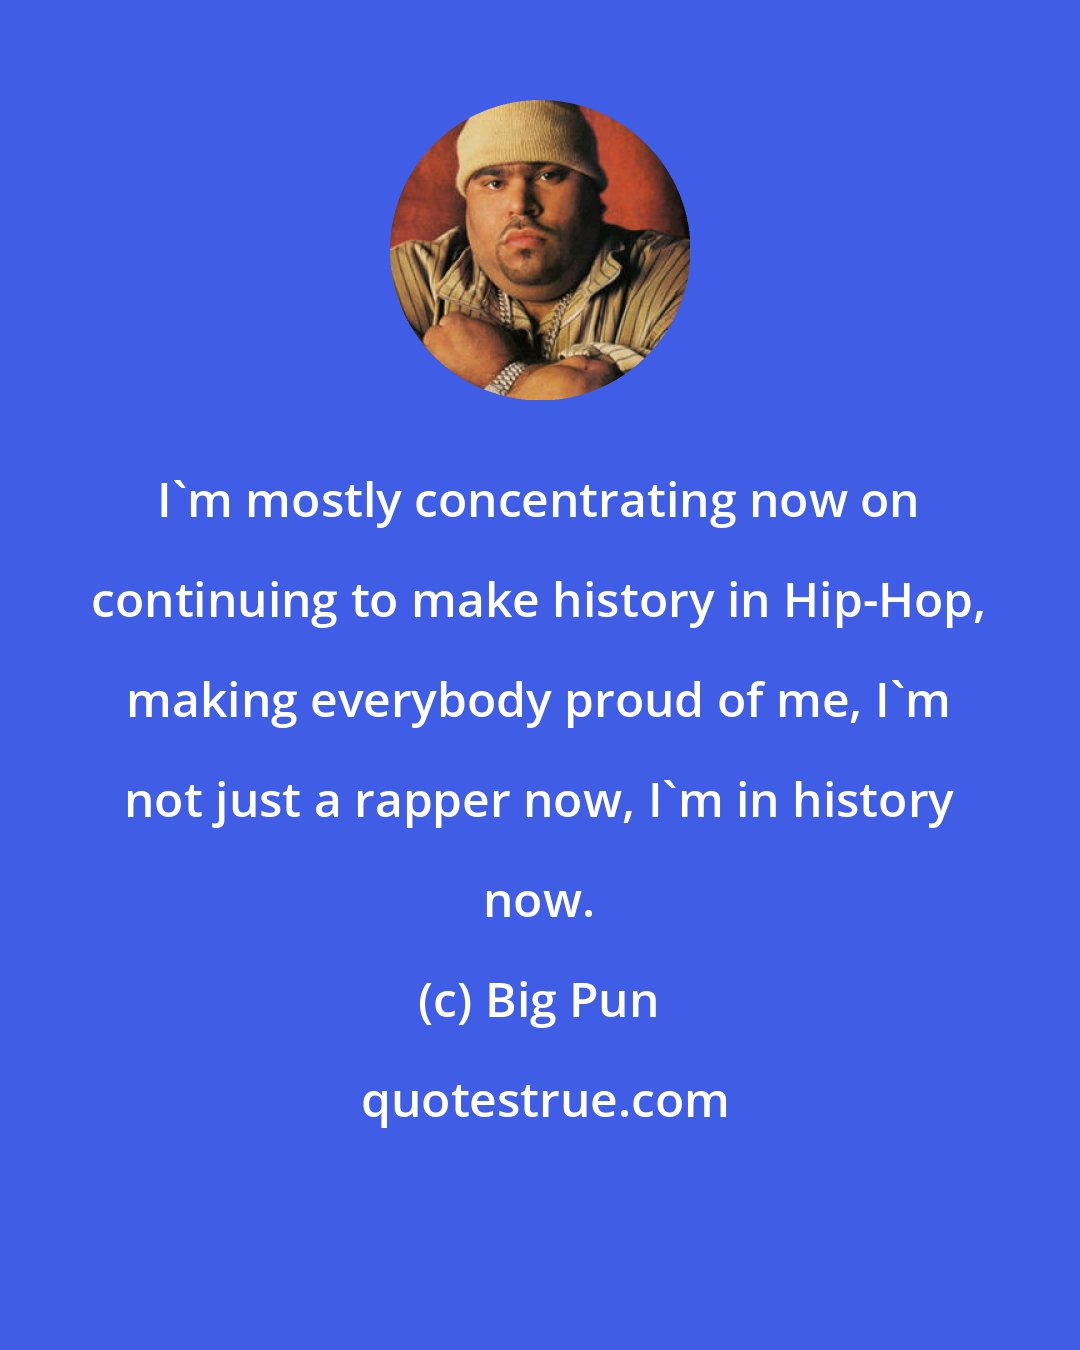 Big Pun: I'm mostly concentrating now on continuing to make history in Hip-Hop, making everybody proud of me, I'm not just a rapper now, I'm in history now.